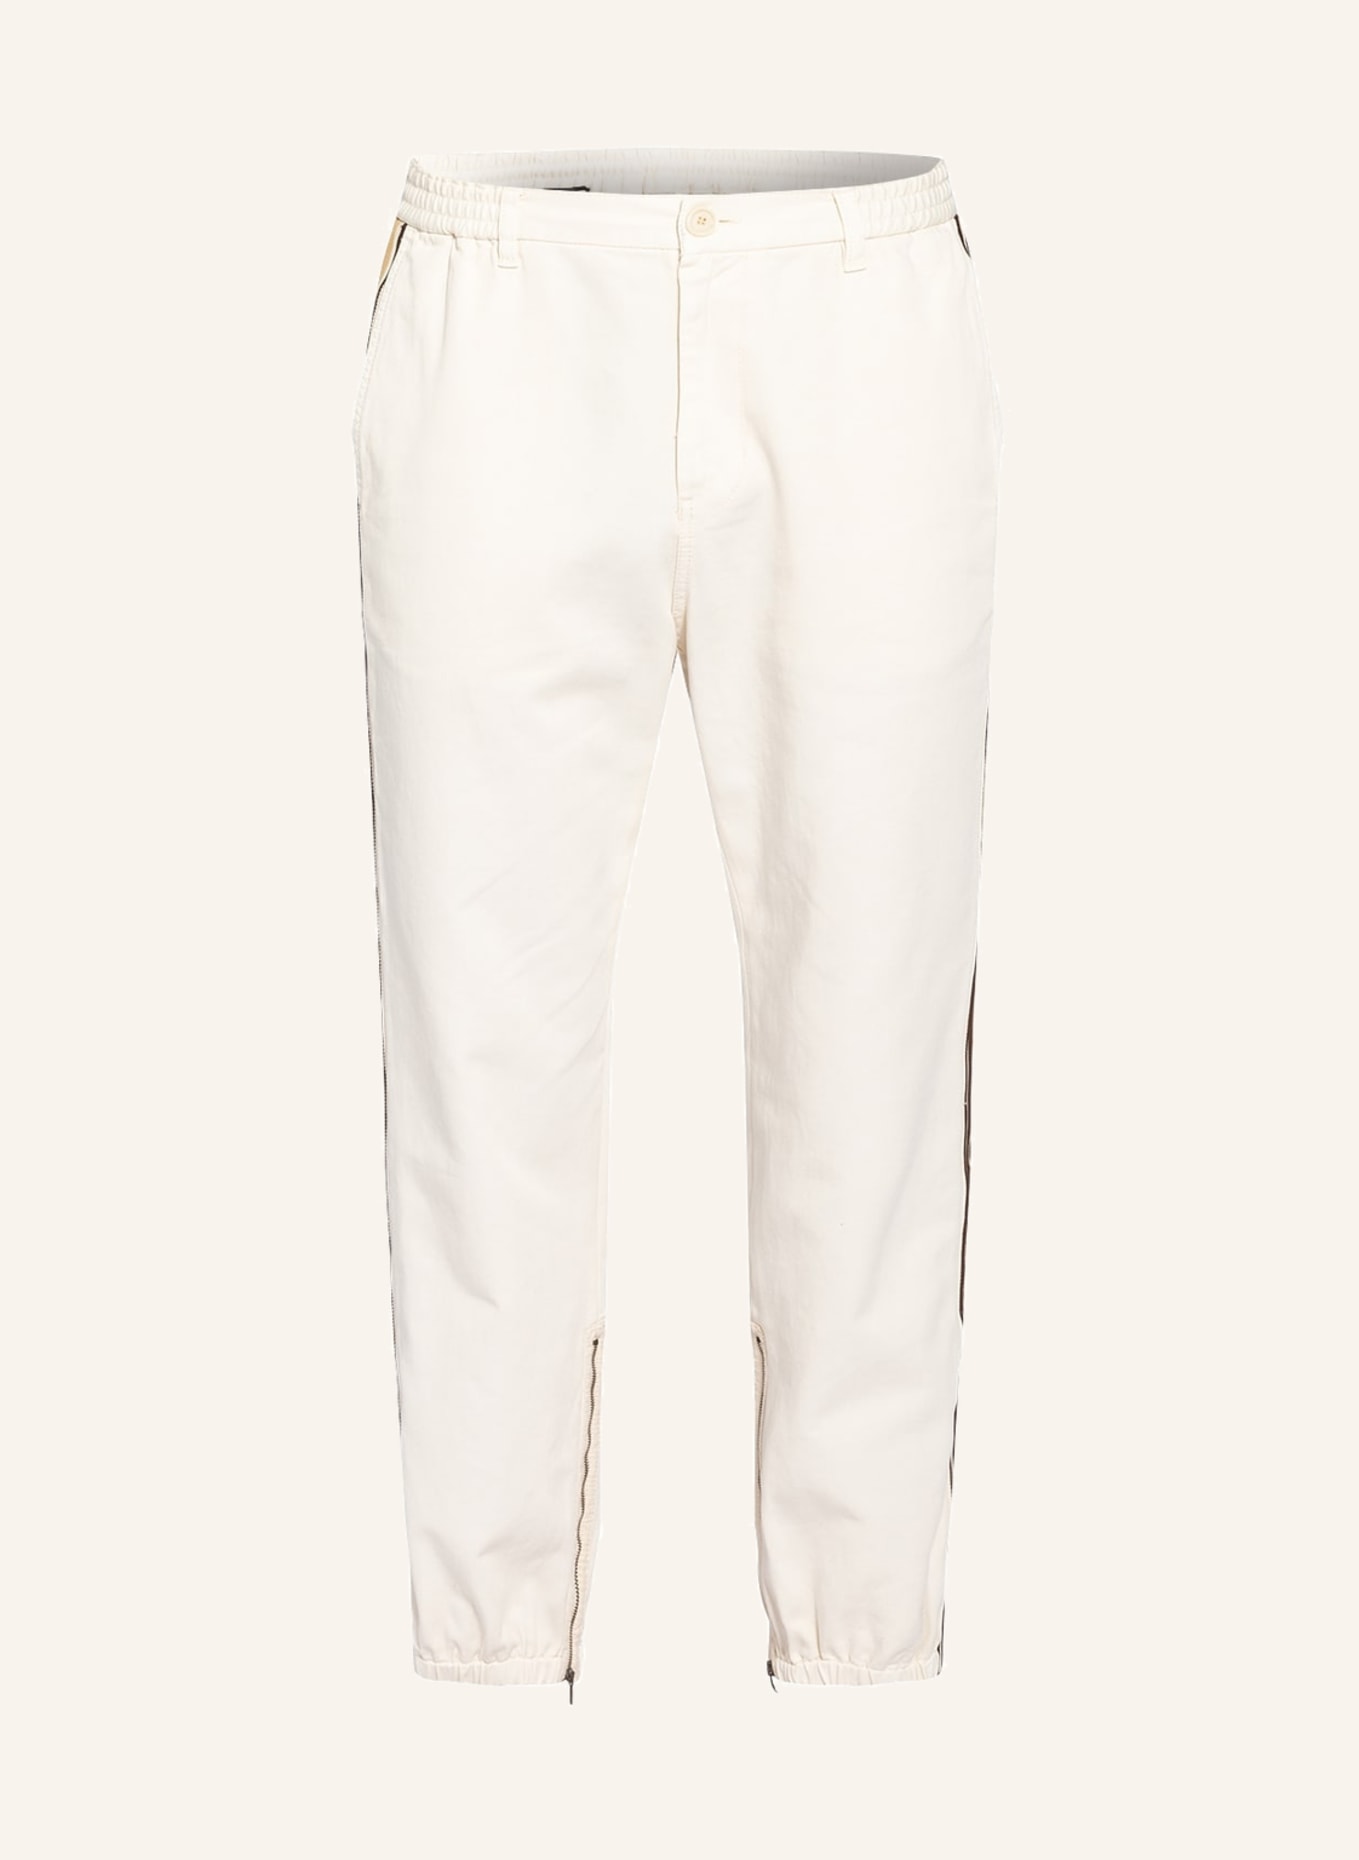 GUCCI Pants in jogger style with tuxedo stripes in ecru | Breuninger